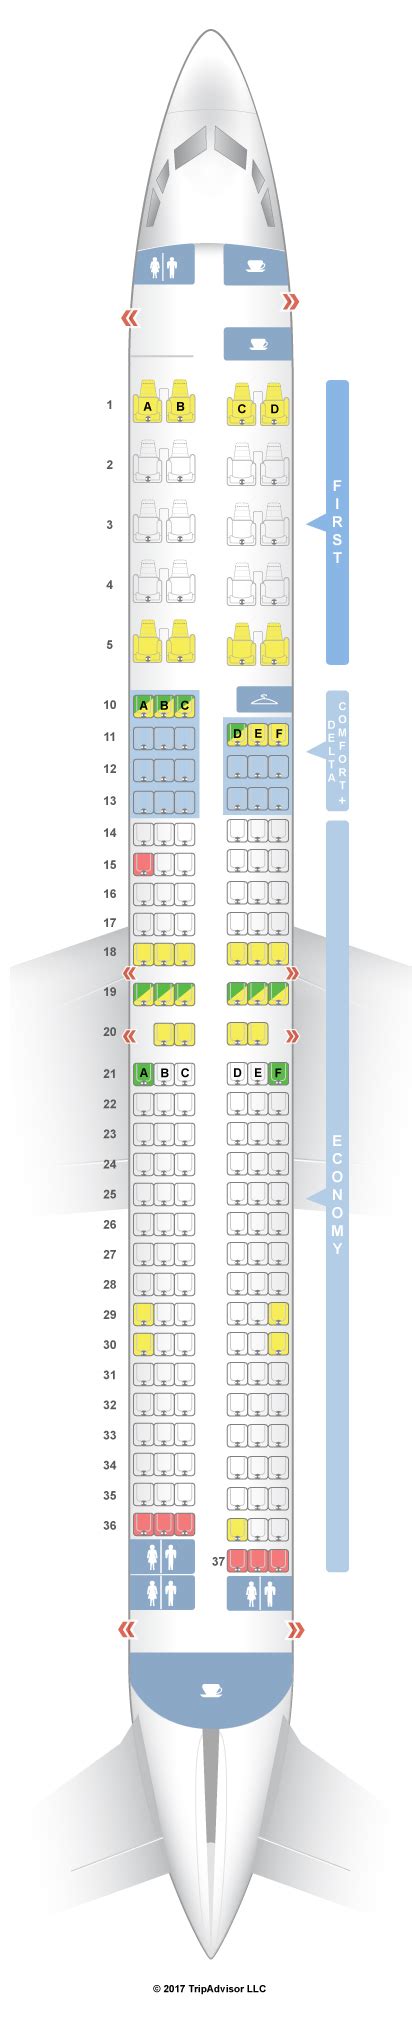 Click any seat for more information. Key. For your next United flight, use this seating chart to get the most comfortable seats, legroom, and recline on .. 